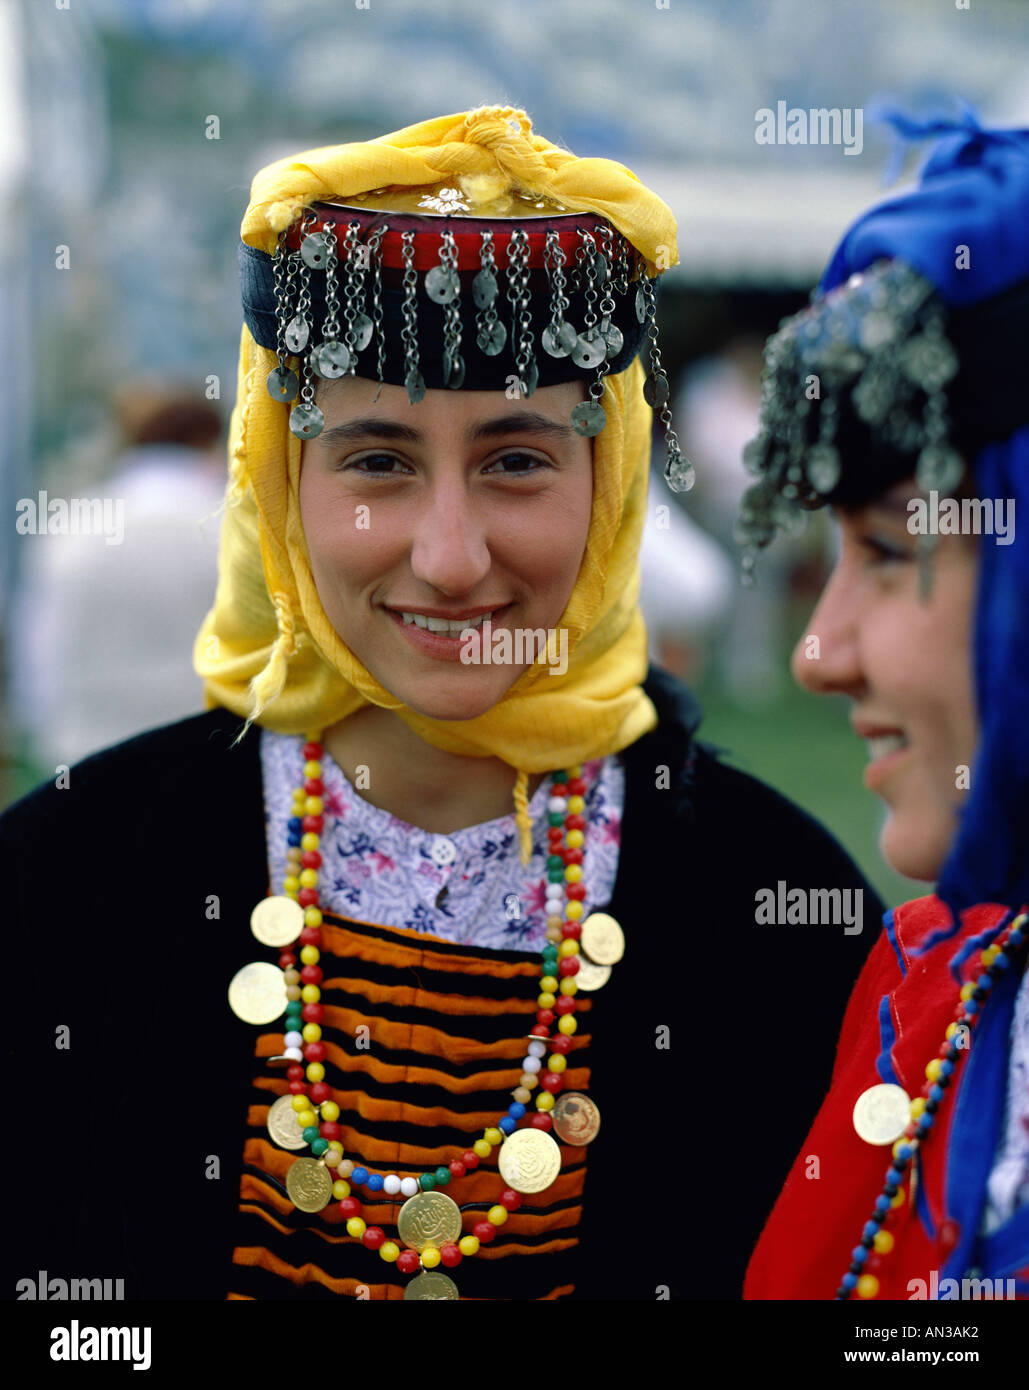 Girl Dressed in National Costume, Istanbul, Turkey Stock Photo